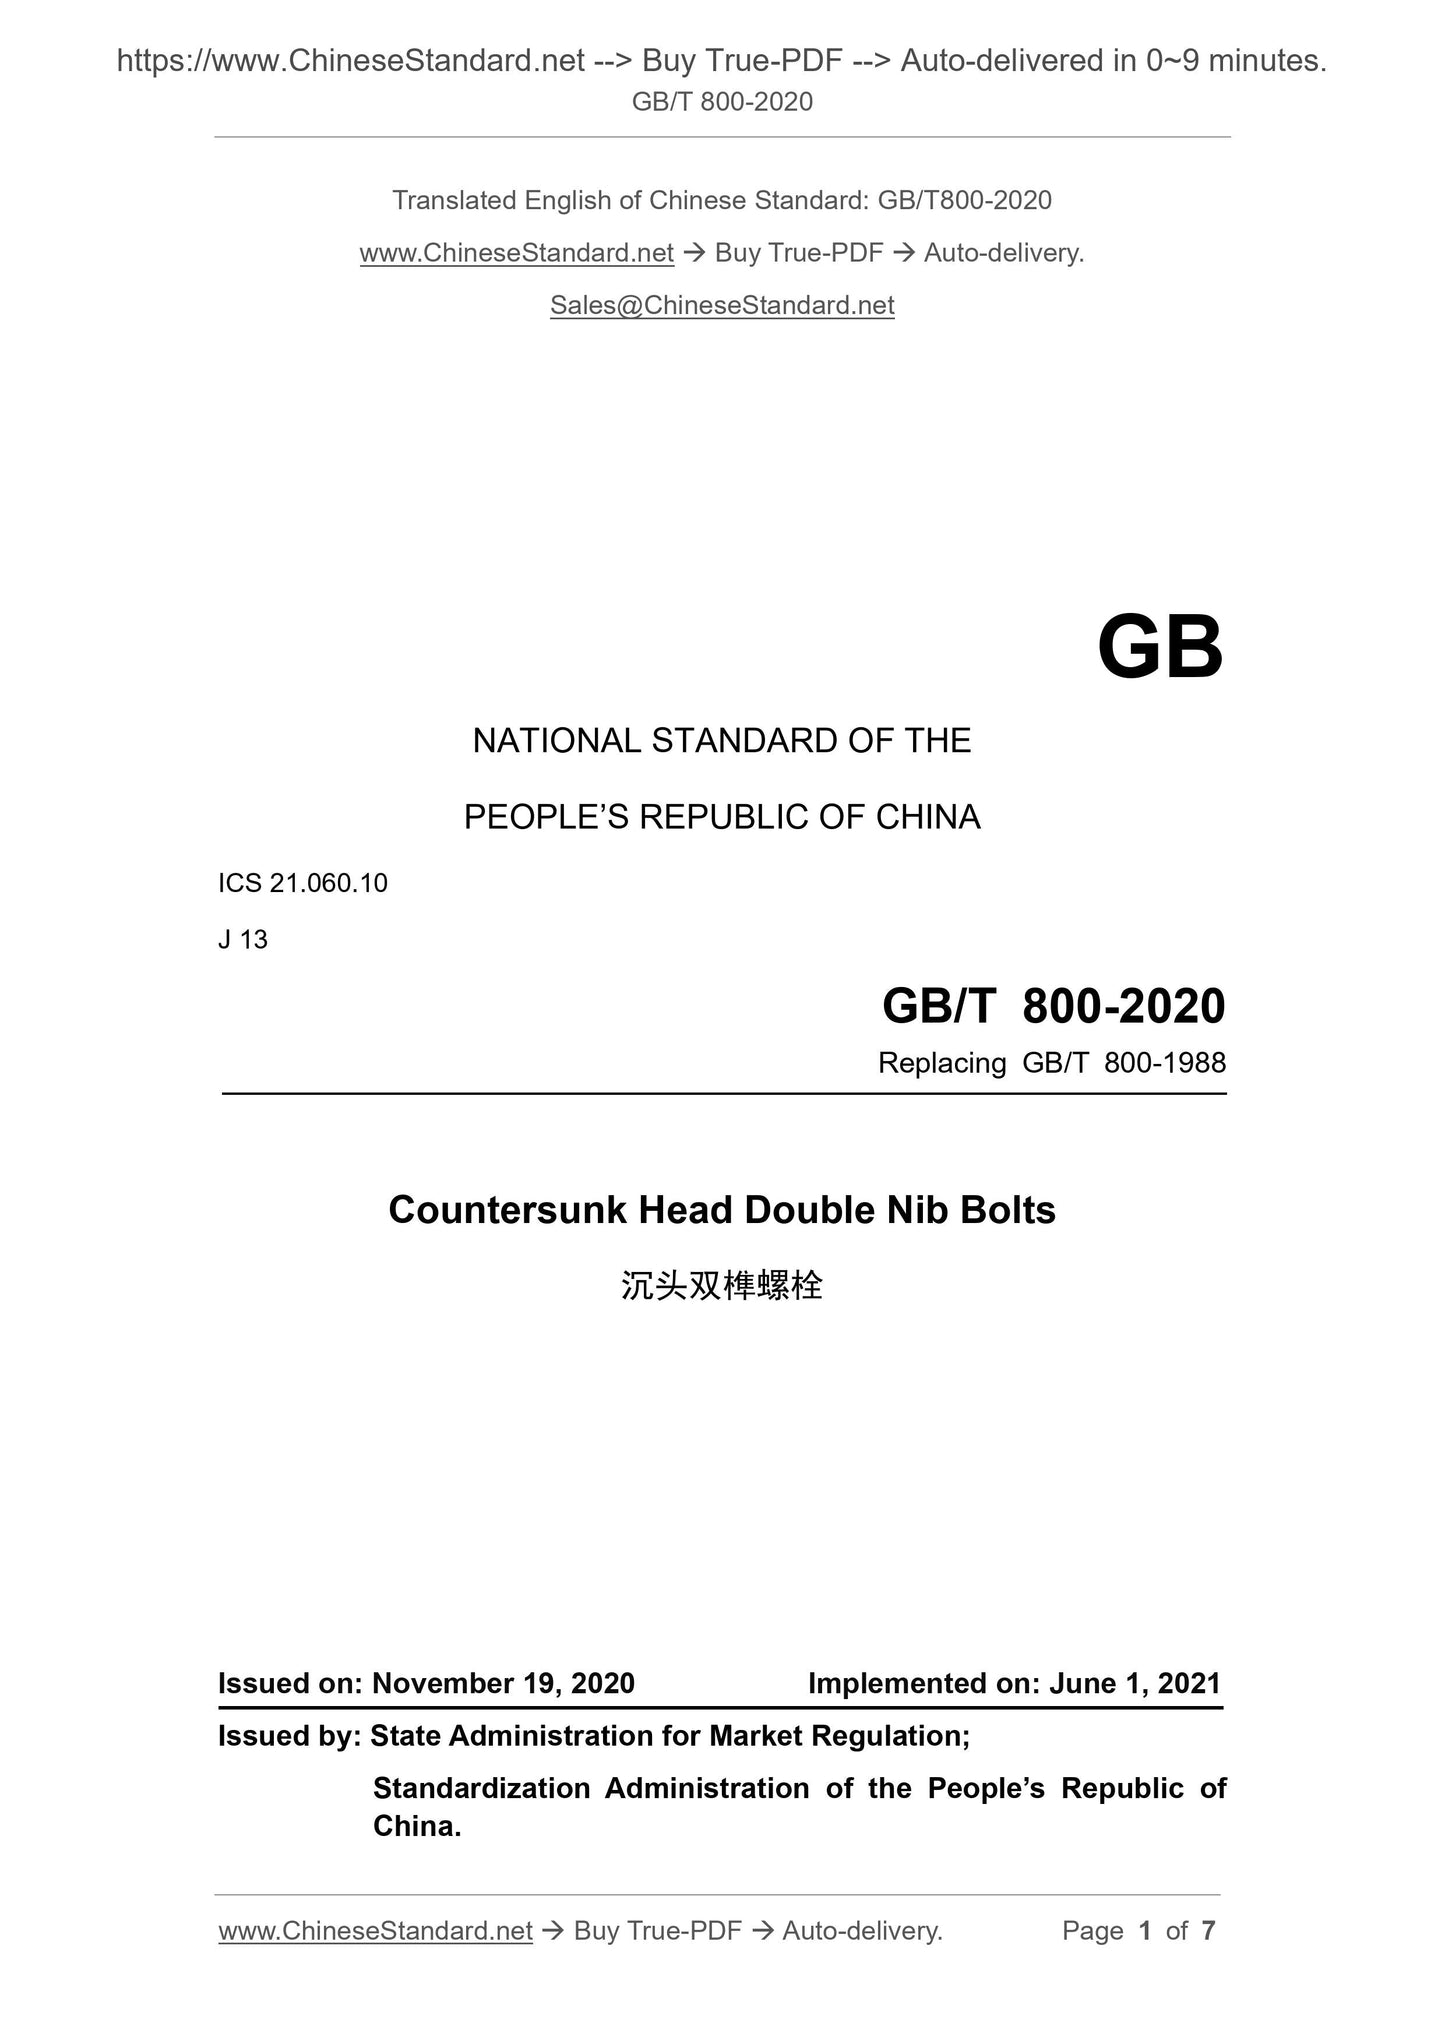 GB/T 800-2020 Page 1